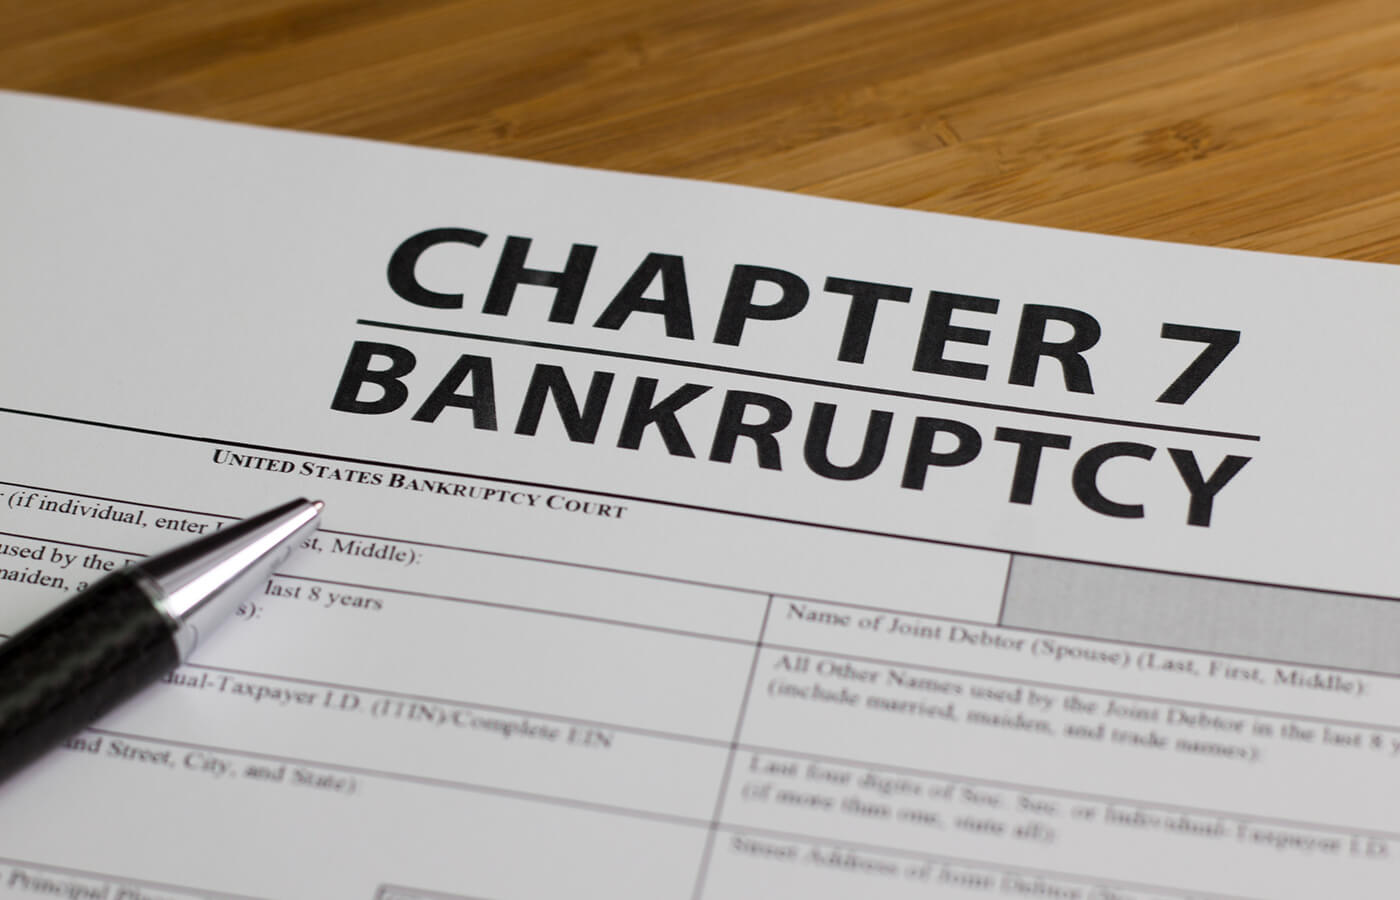 Chapter 7 Bankruptcy: What Is It? Overview and Example